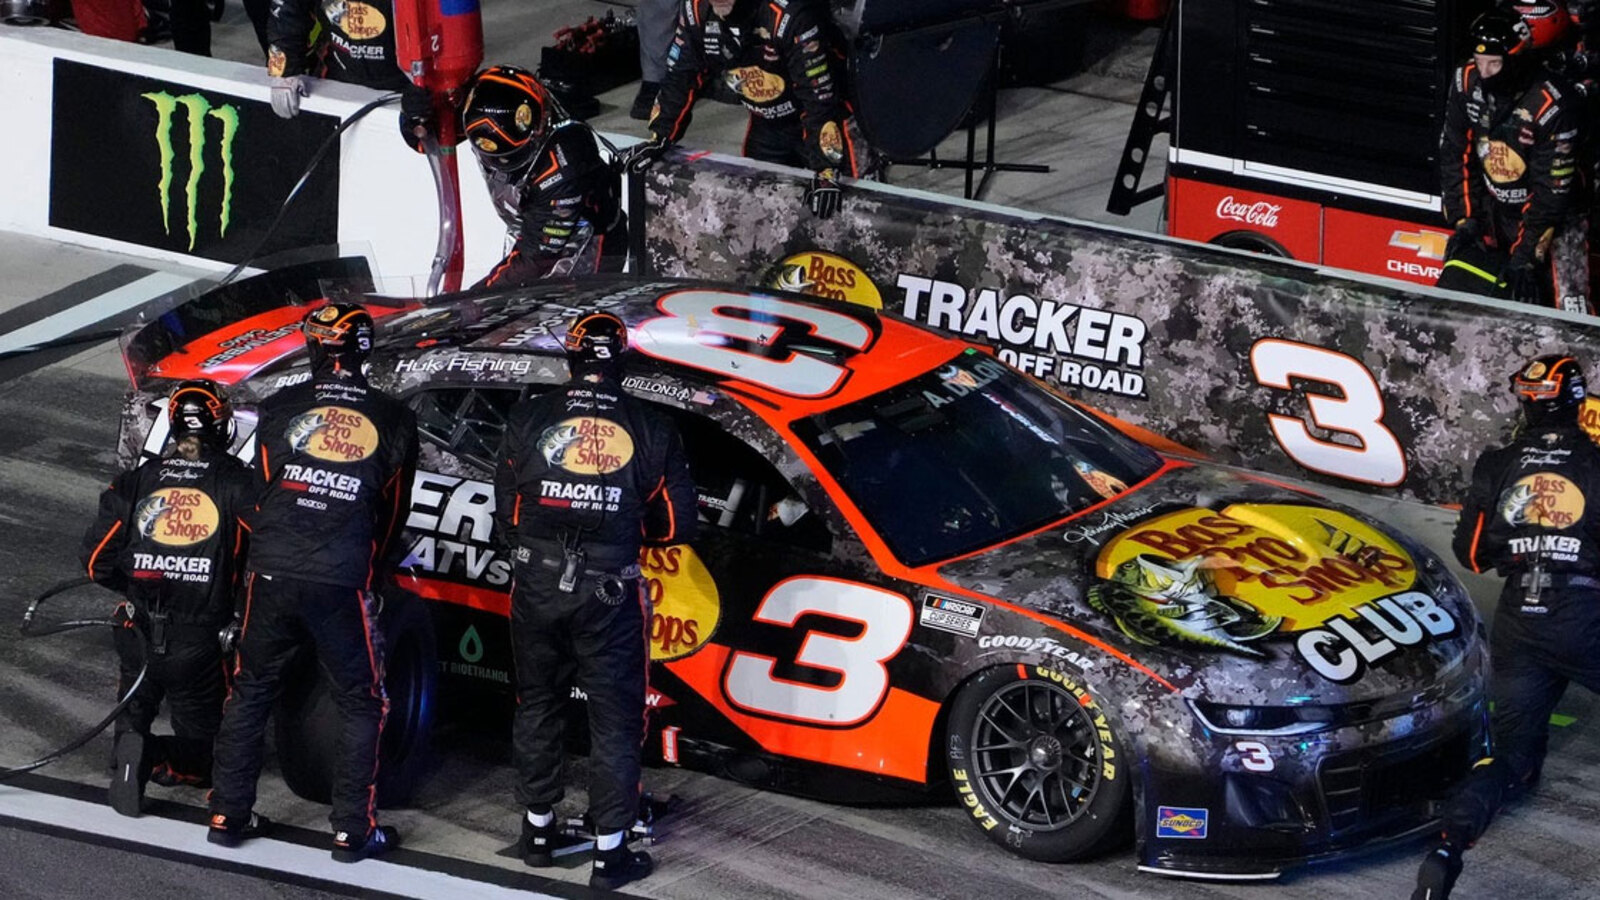 NASCAR issues indefinite suspension to Austin Dillon pit crew member for violating substance abuse policy